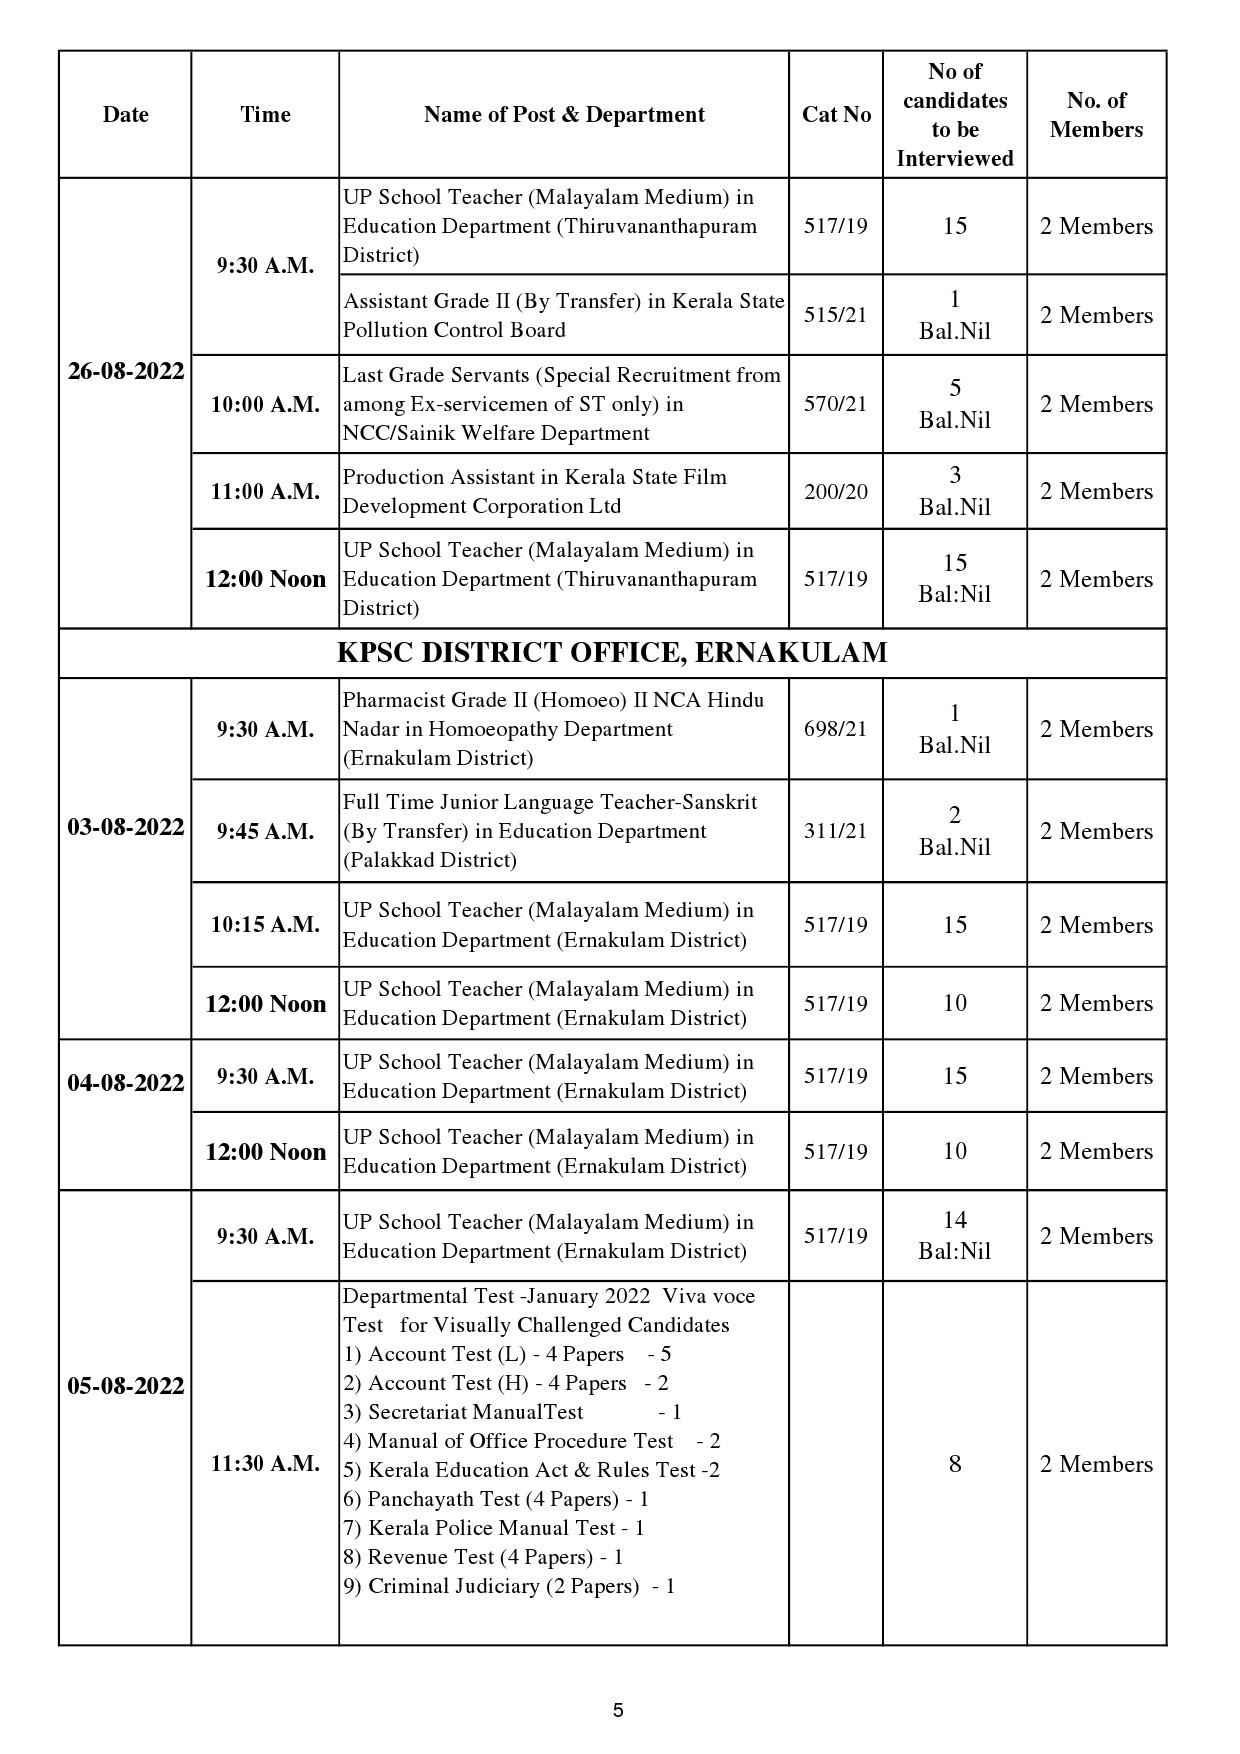 Revised Interview Programme For The Month Of August 2022 - Notification Image 5